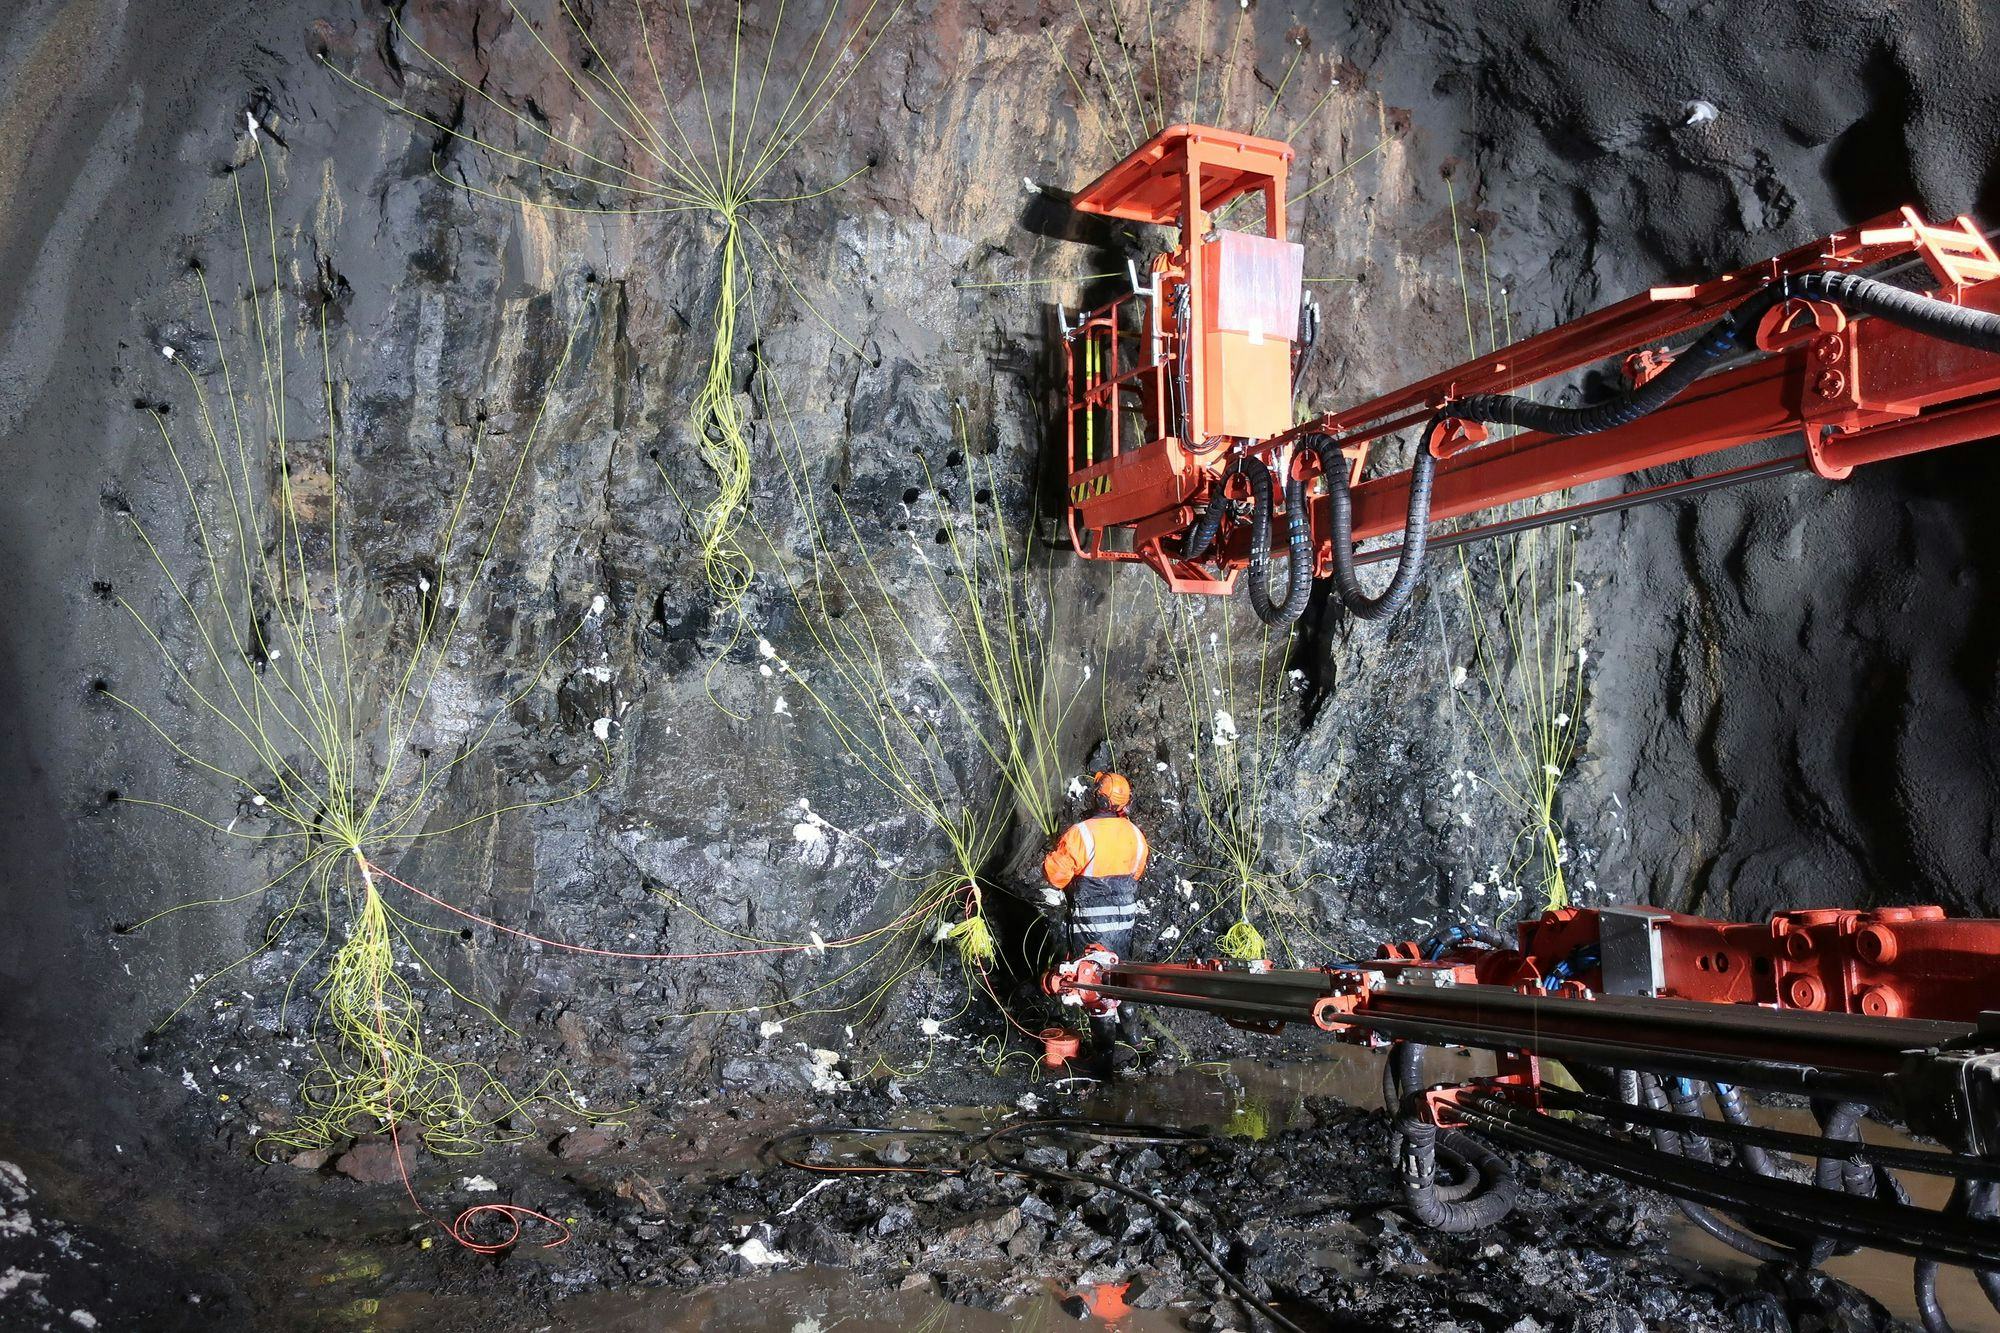 Construction worker next to a red drilling rig, reinforcing a rocky wall with green material